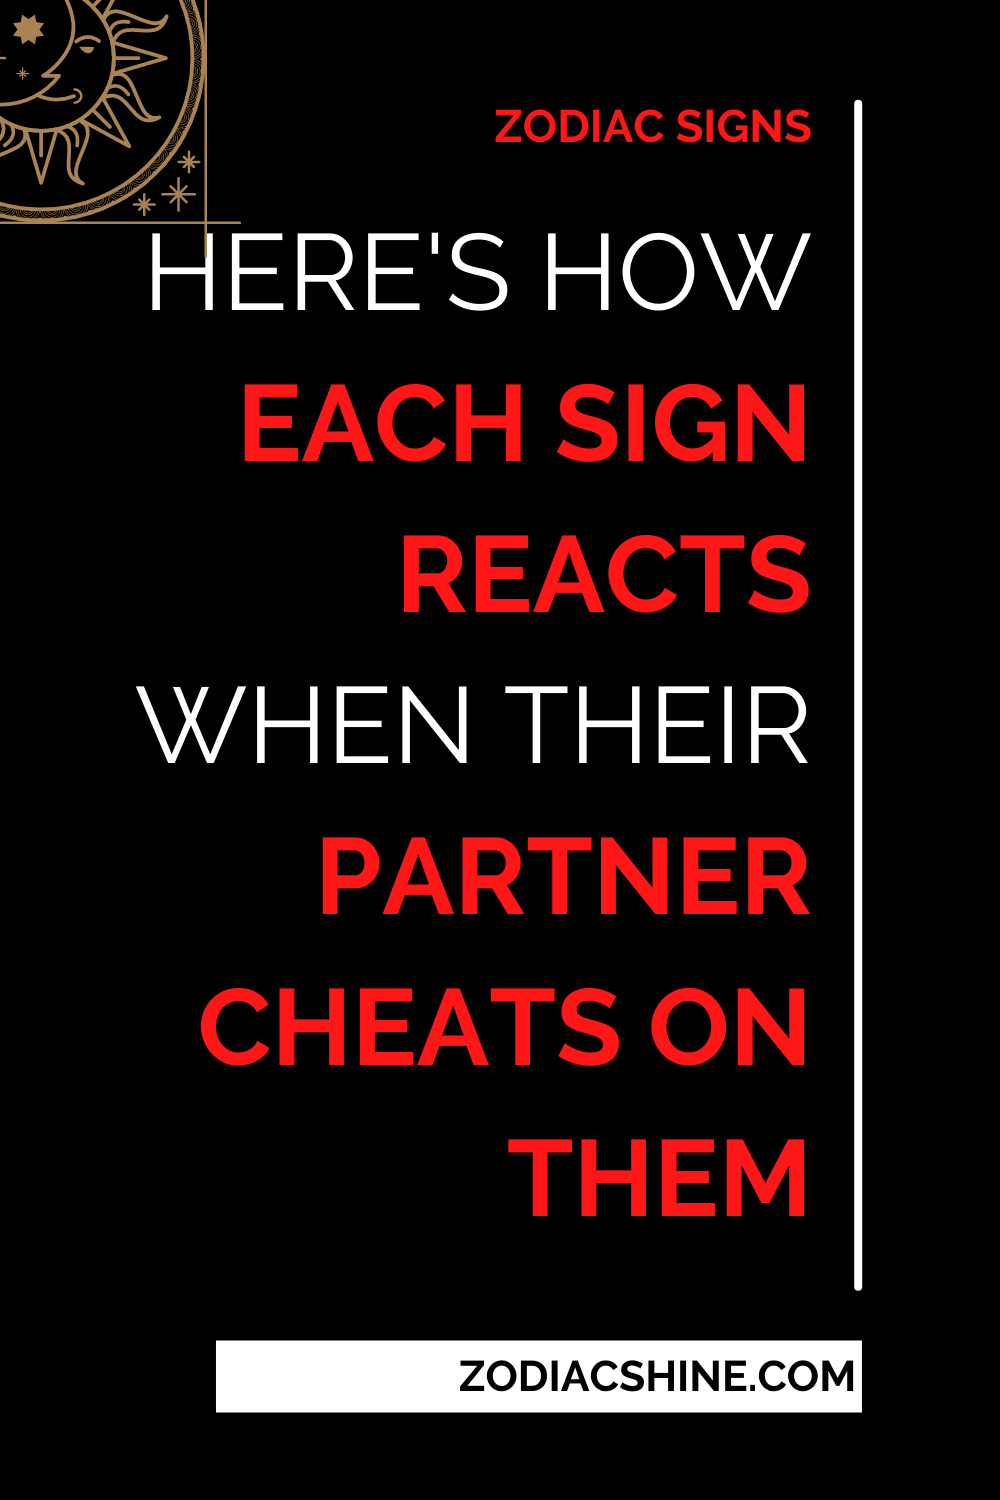 Here's How Each Sign Reacts When Their Partner Cheats On Them